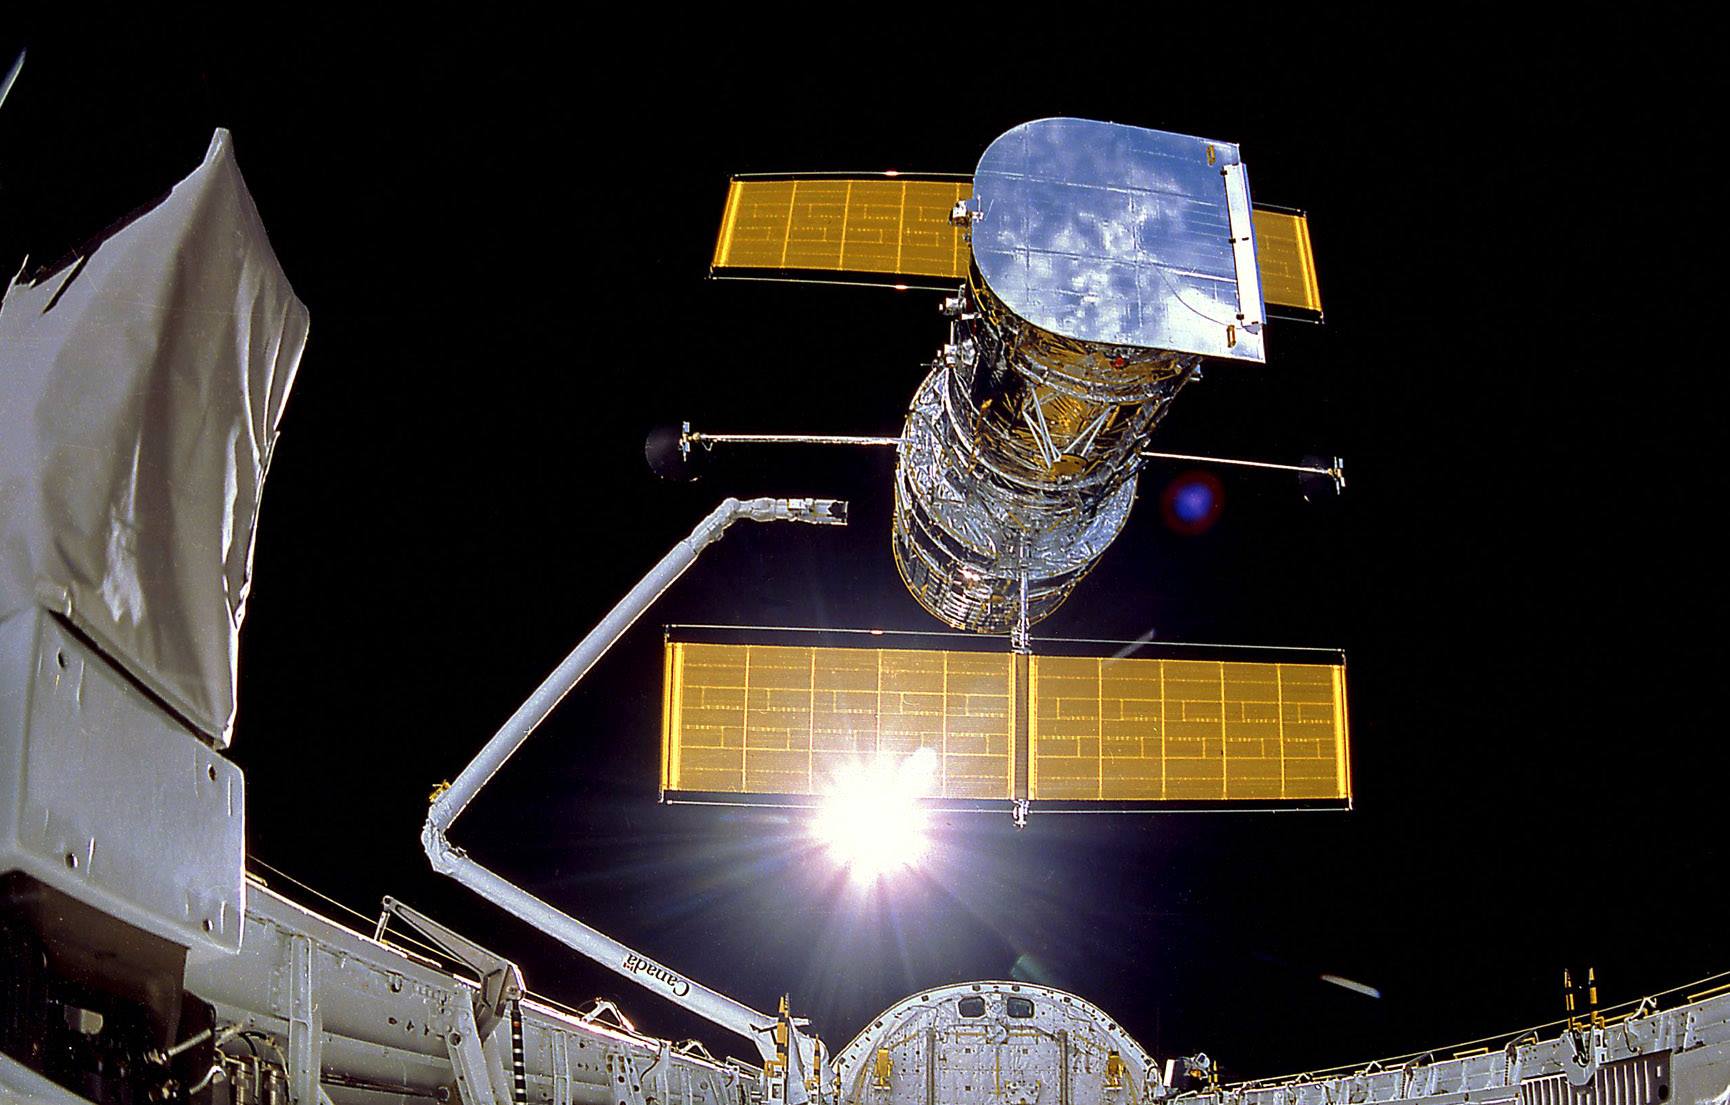 The NASA/ESA Hubble Space Telescope was photographed being deployed on April 25, 1990. Photo Credit: NASA